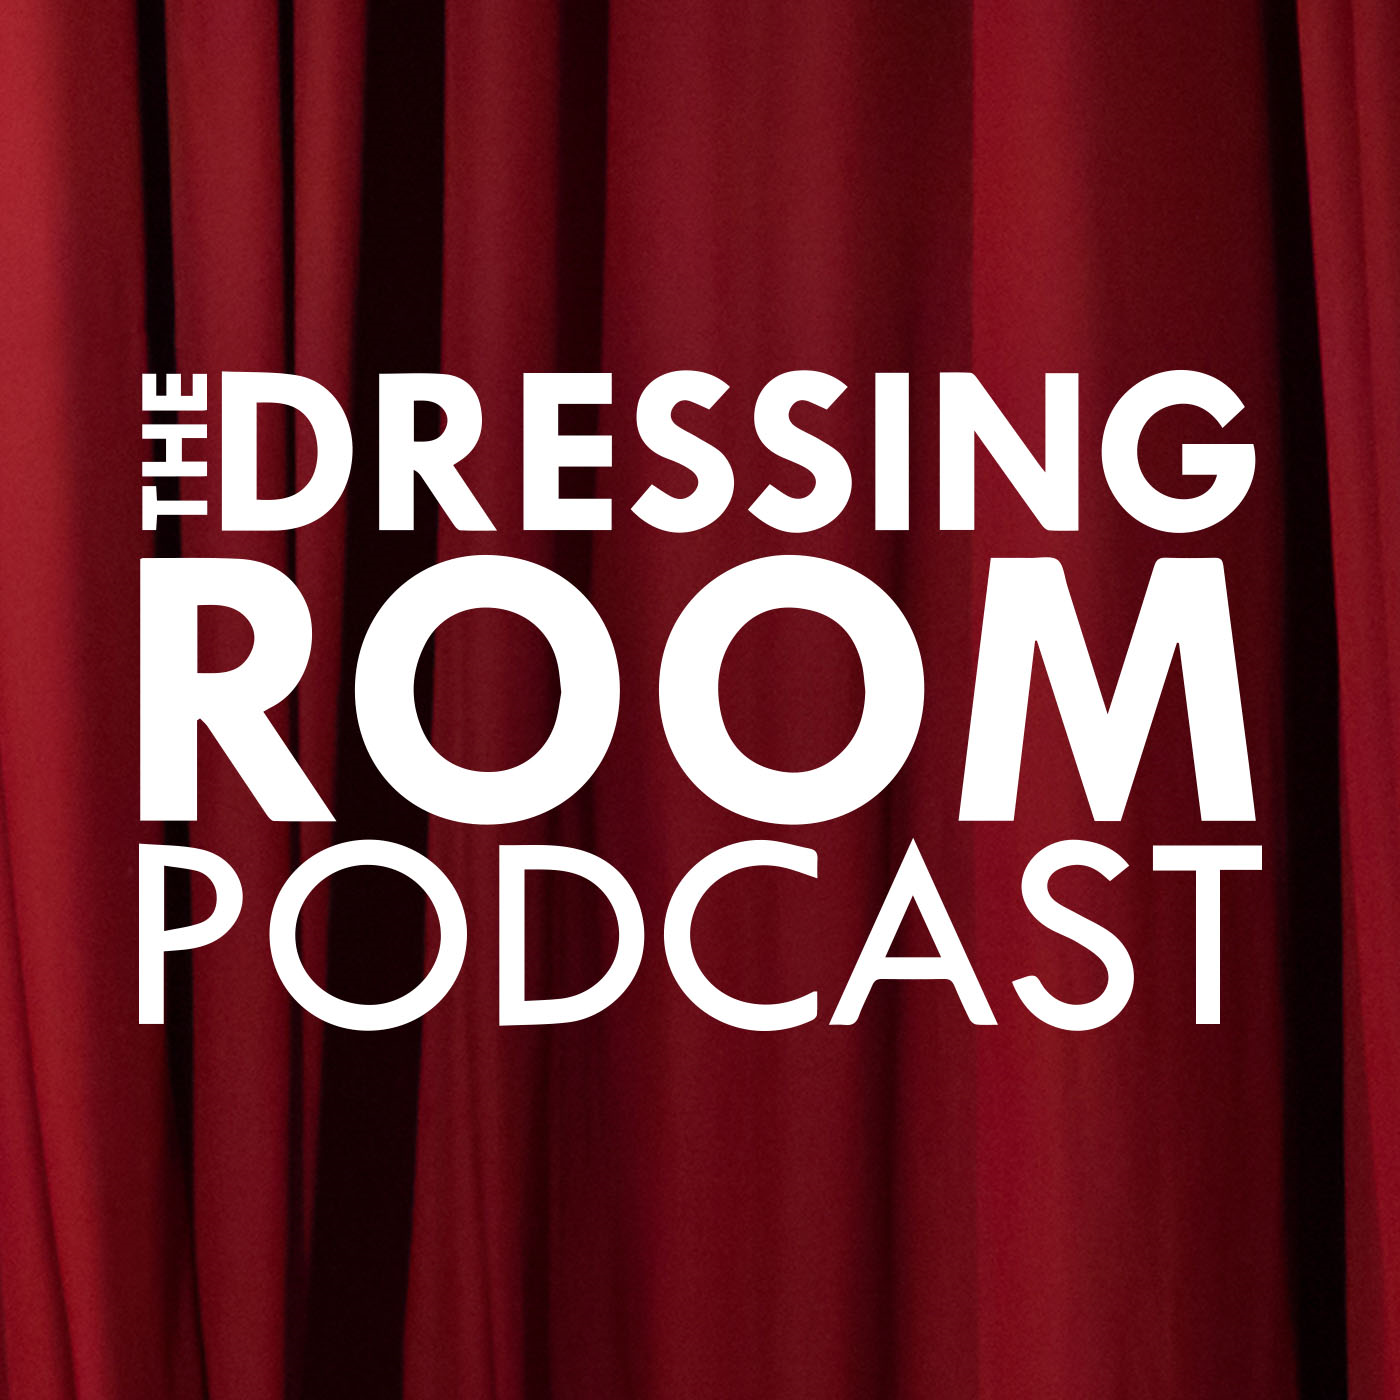 THE DRESSING ROOM PODCAST - EPISODE 1 - THE BODYGUARD